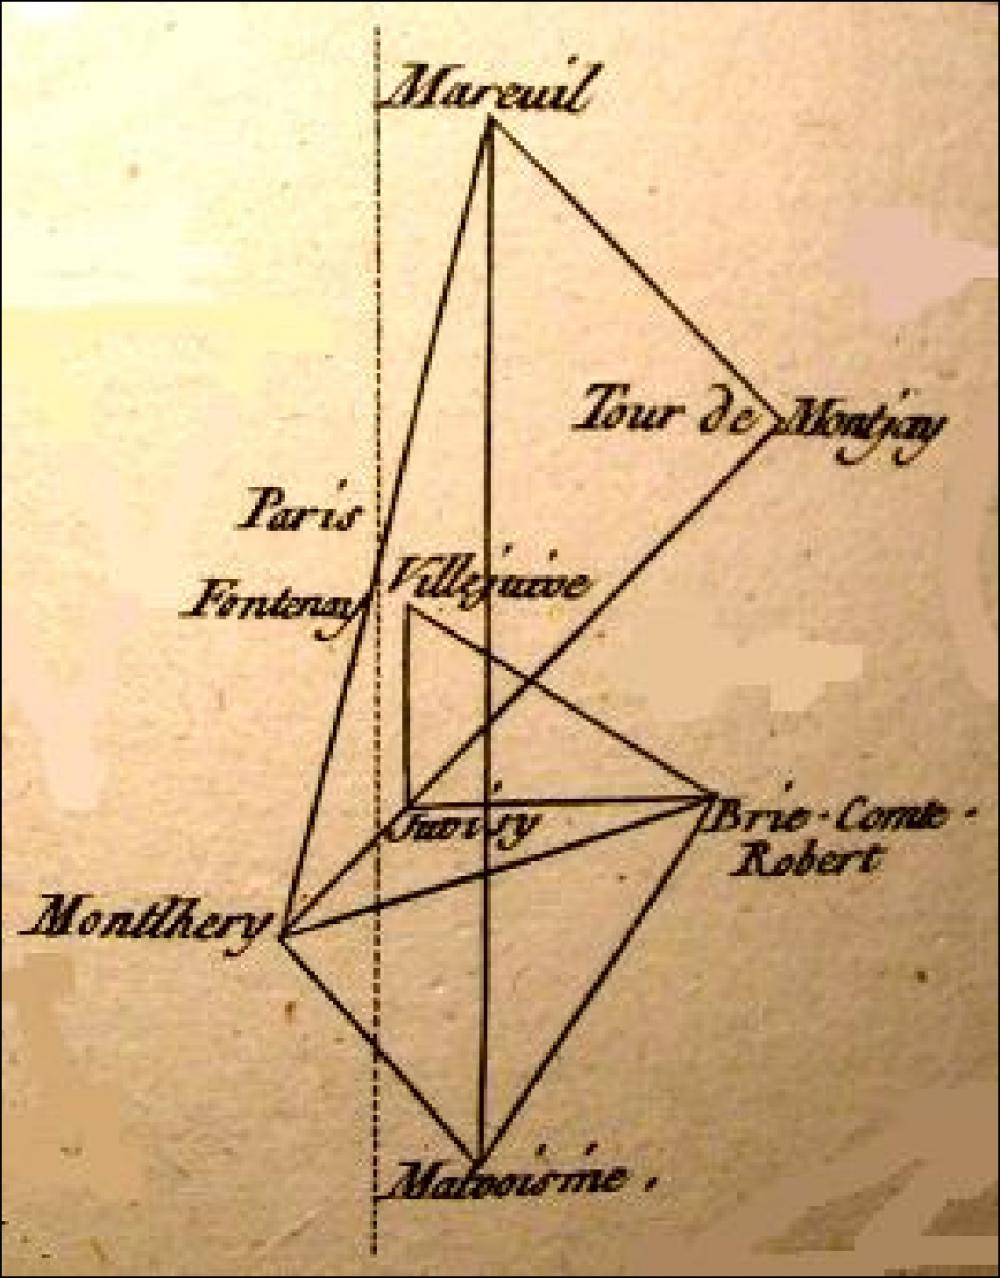 The triangulation method was implemented and used 